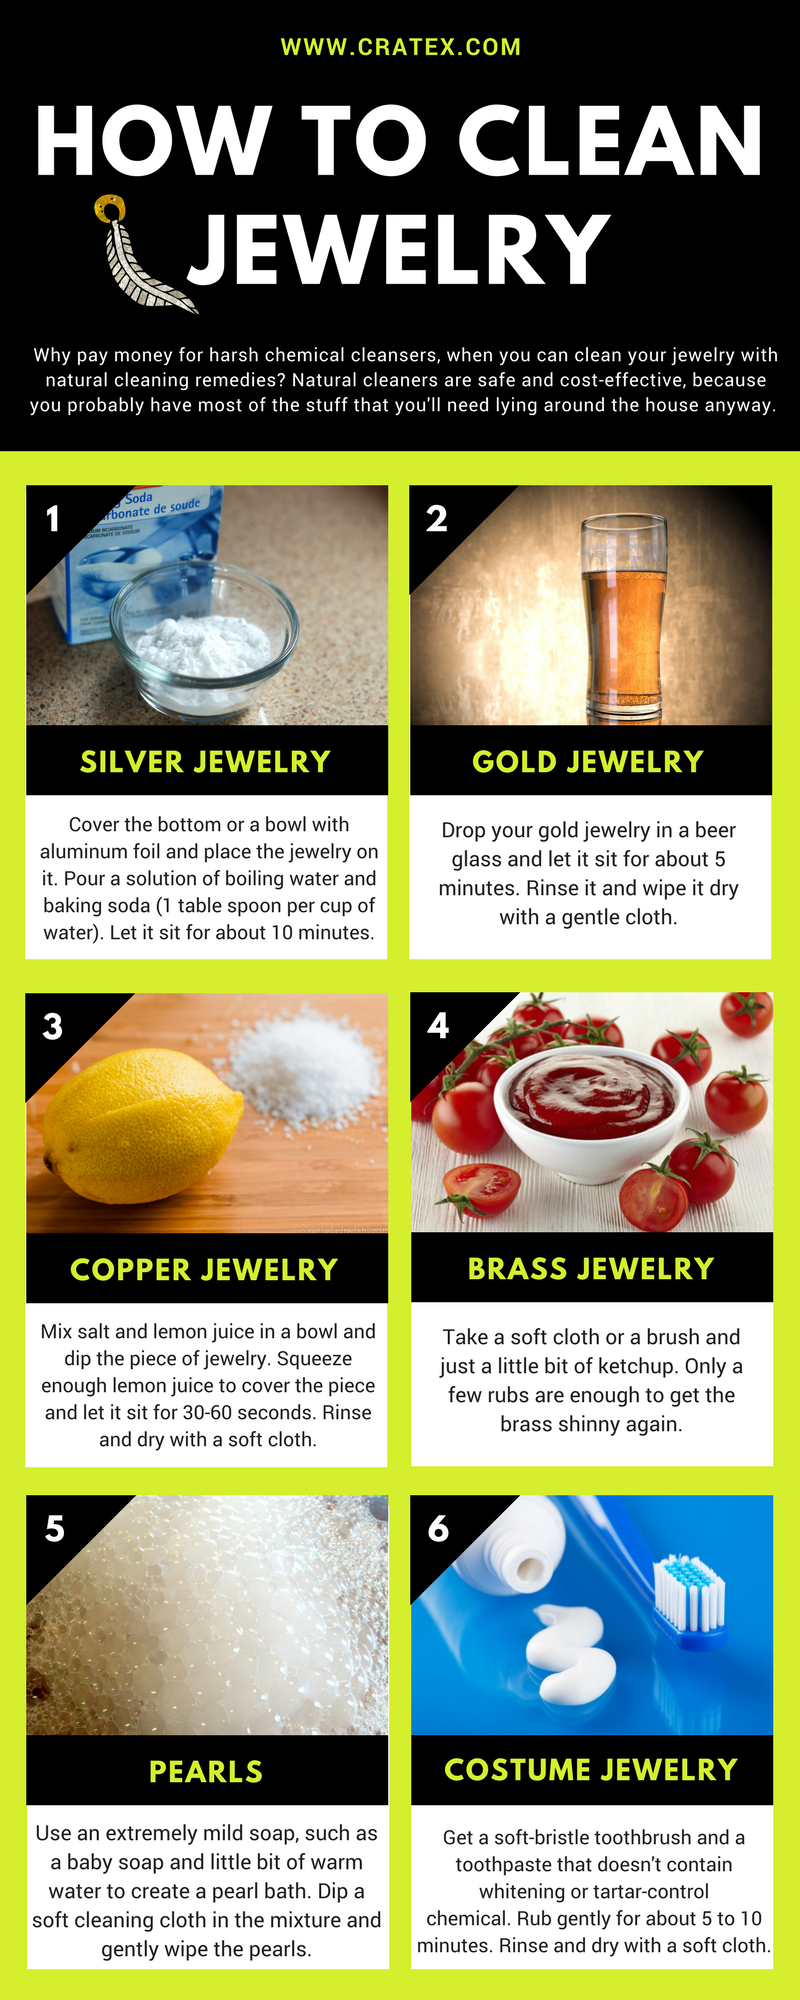 How to Clean Jewelry - CRATEX Infographic